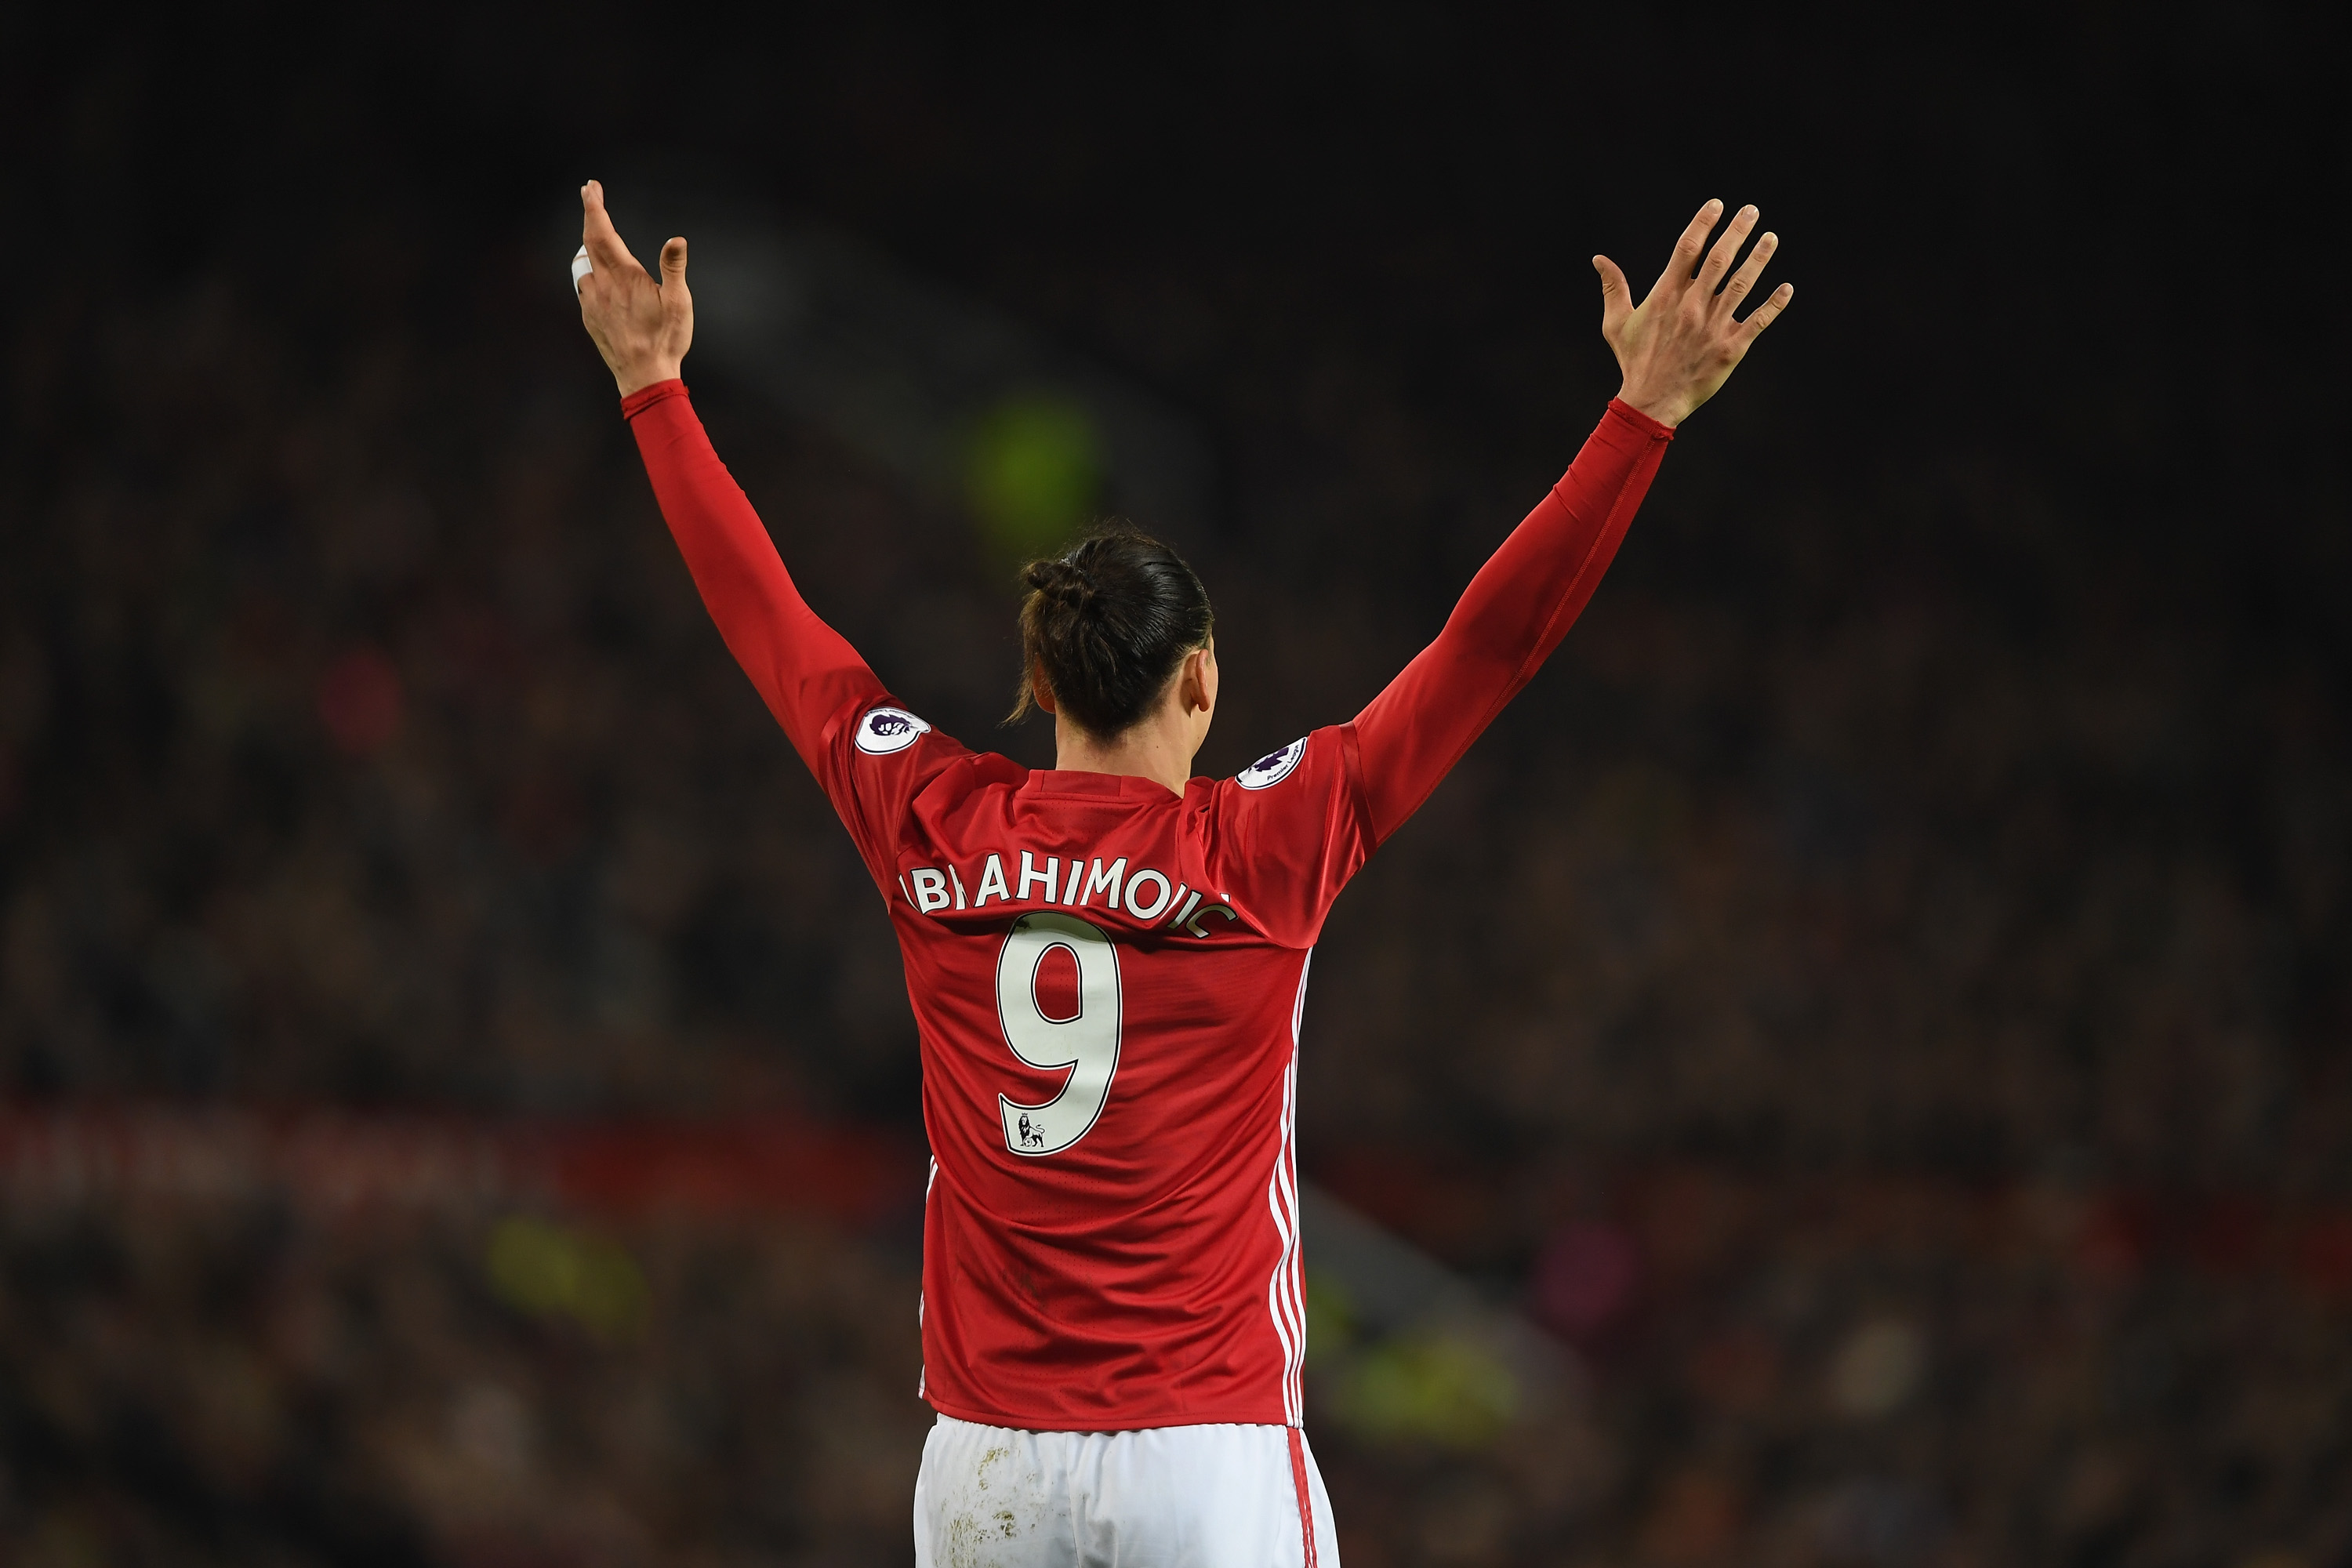 MANCHESTER, ENGLAND - JANUARY 15:  Zlatan Ibrahimovic of Manchester United gestures during the Premier League match between Manchester United and Liverpool at Old Trafford on January 15, 2017 in Manchester, England.  (Photo by Mike Hewitt/Getty Images)